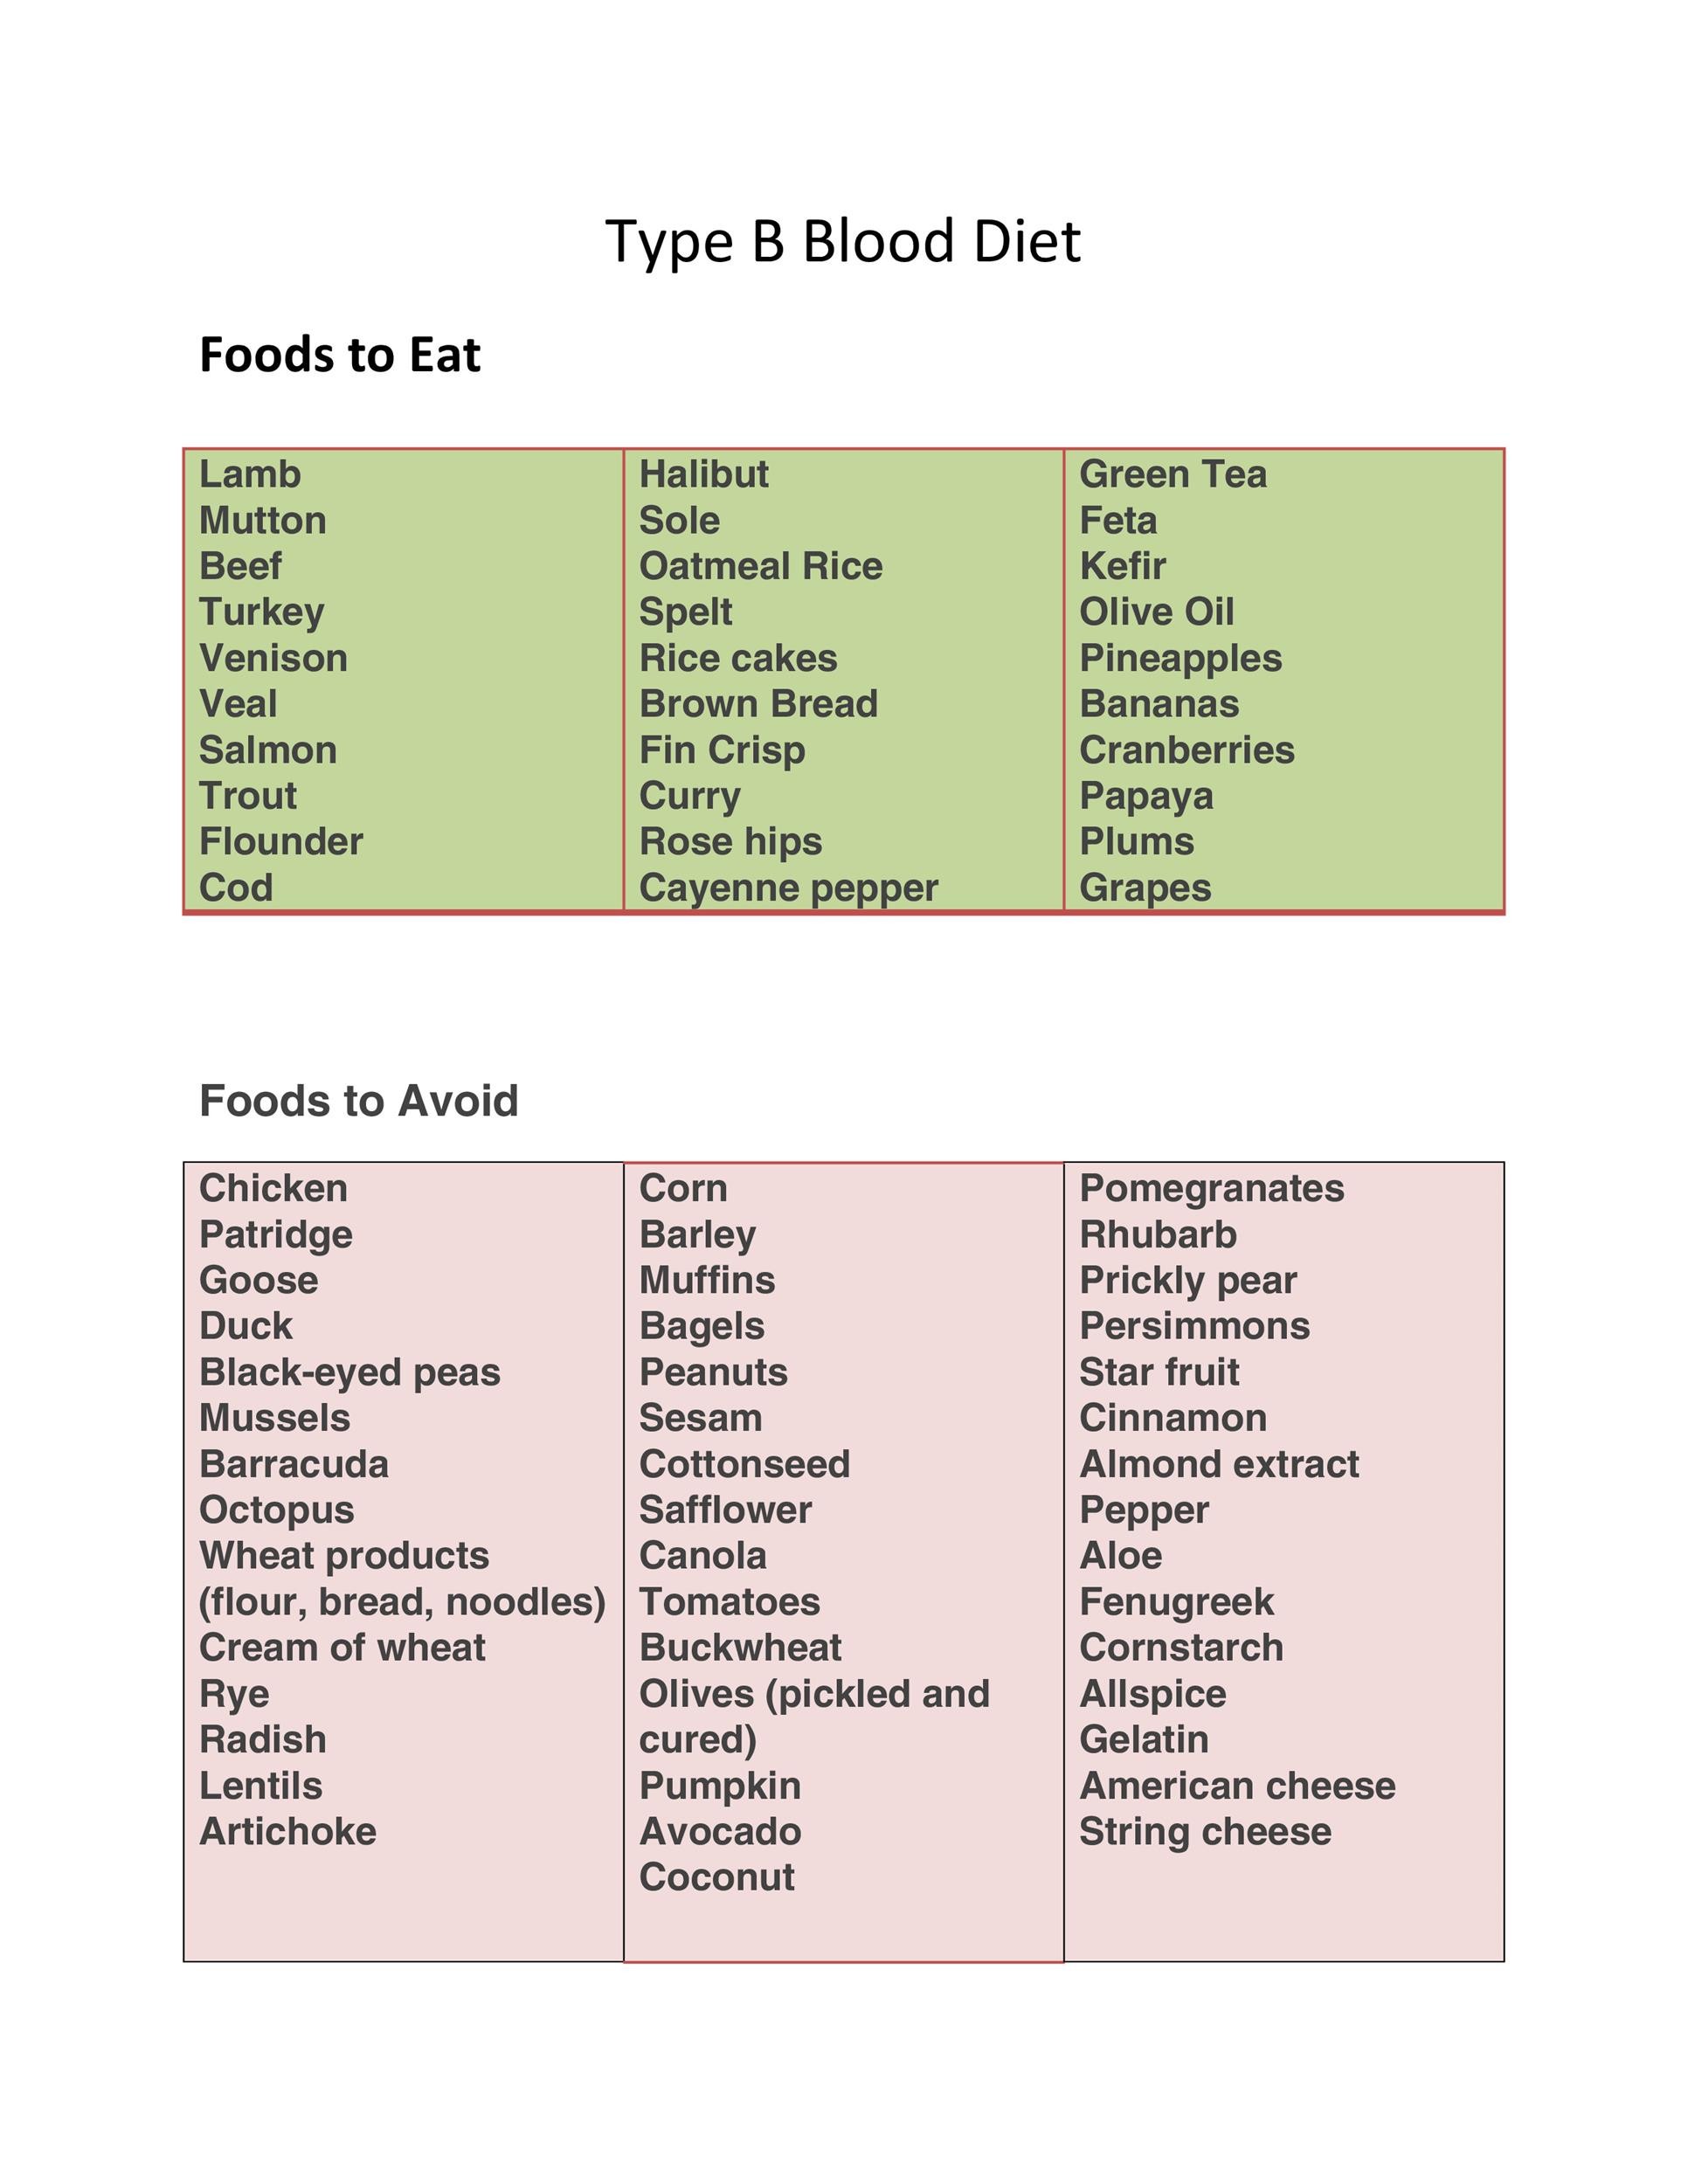 Diet Chart According To Blood Group B